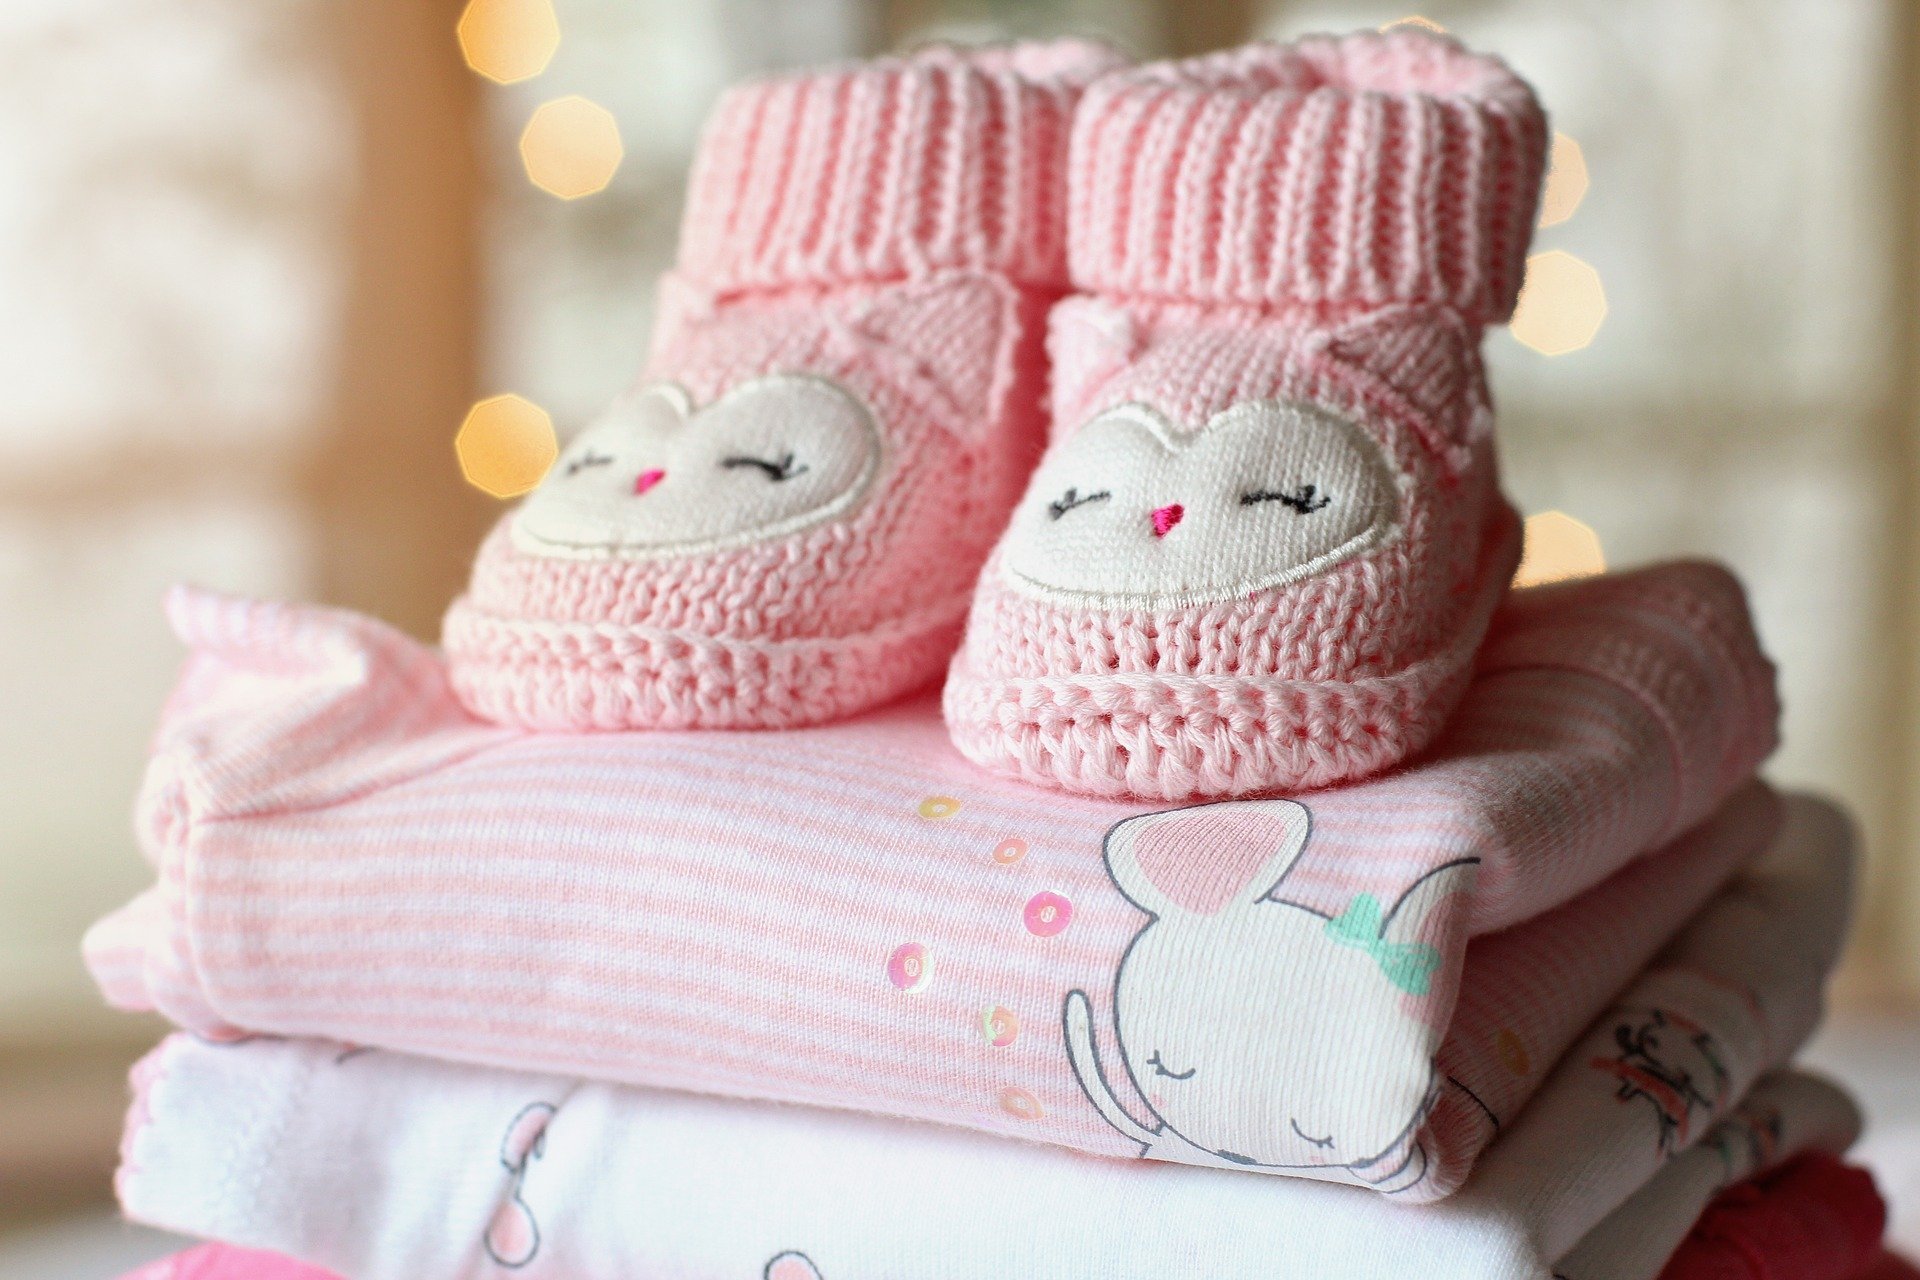 Baby clothes | Source: Pixabay